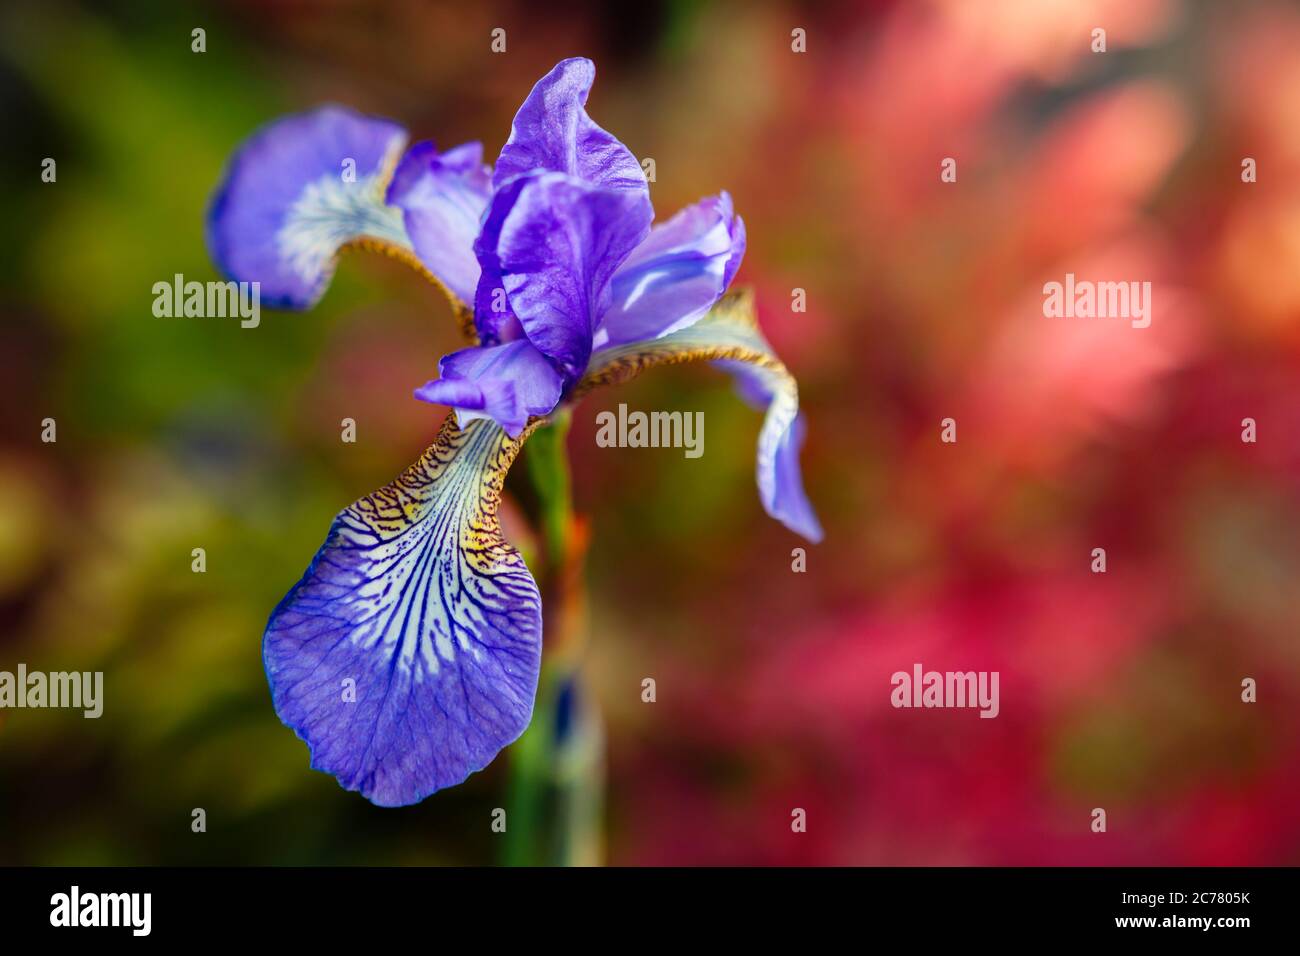 Iris sanguinea in bloom, with a red fiery background. Stock Photo